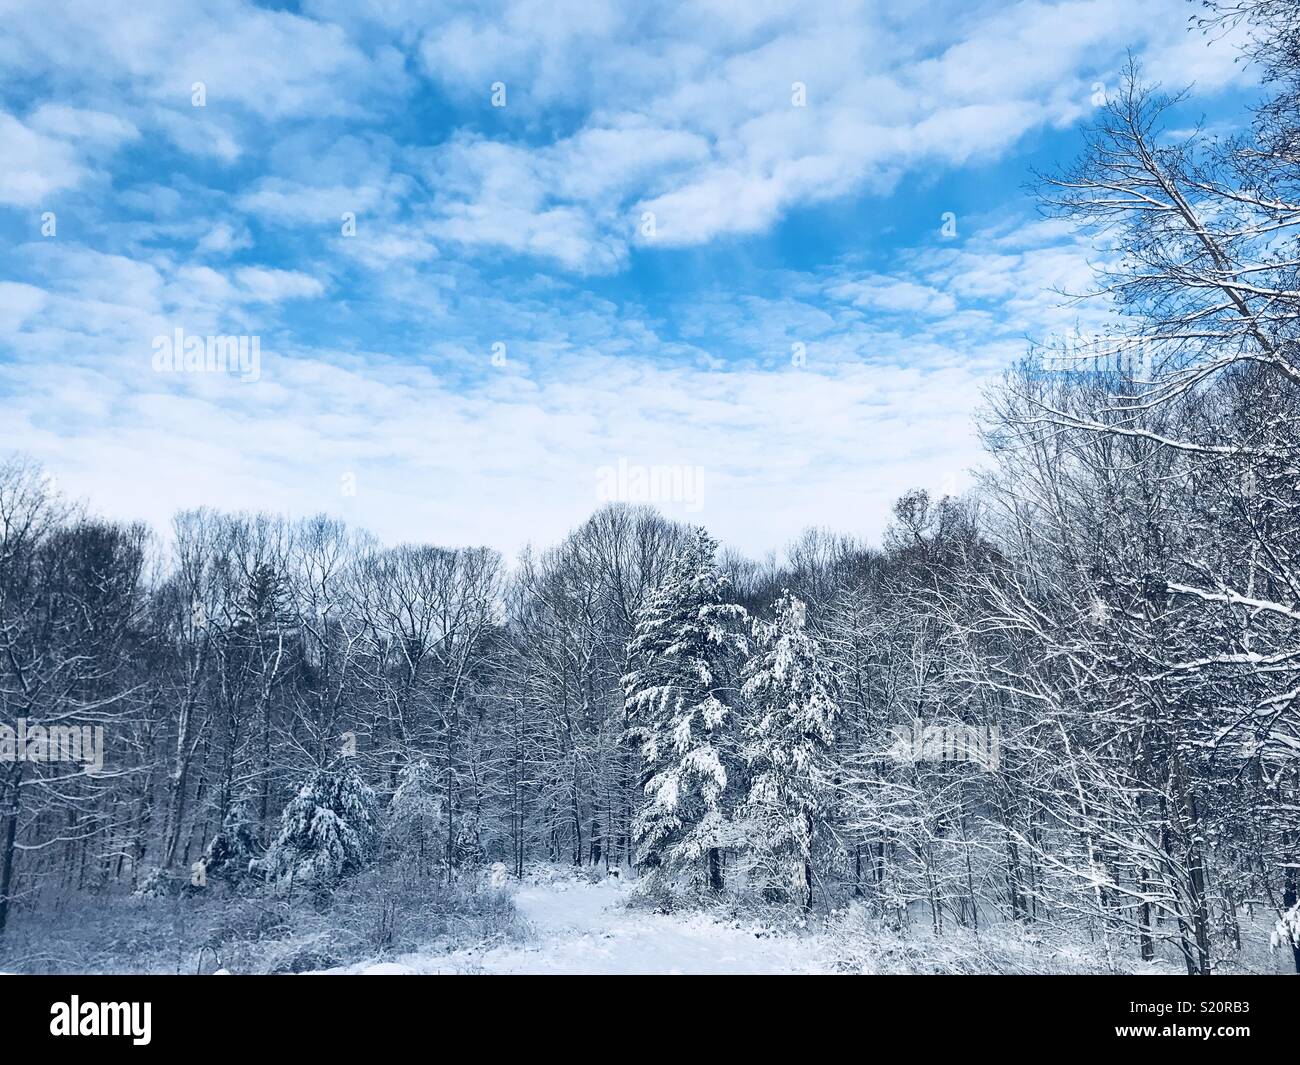 Looking out at the woods in winter Stock Photo